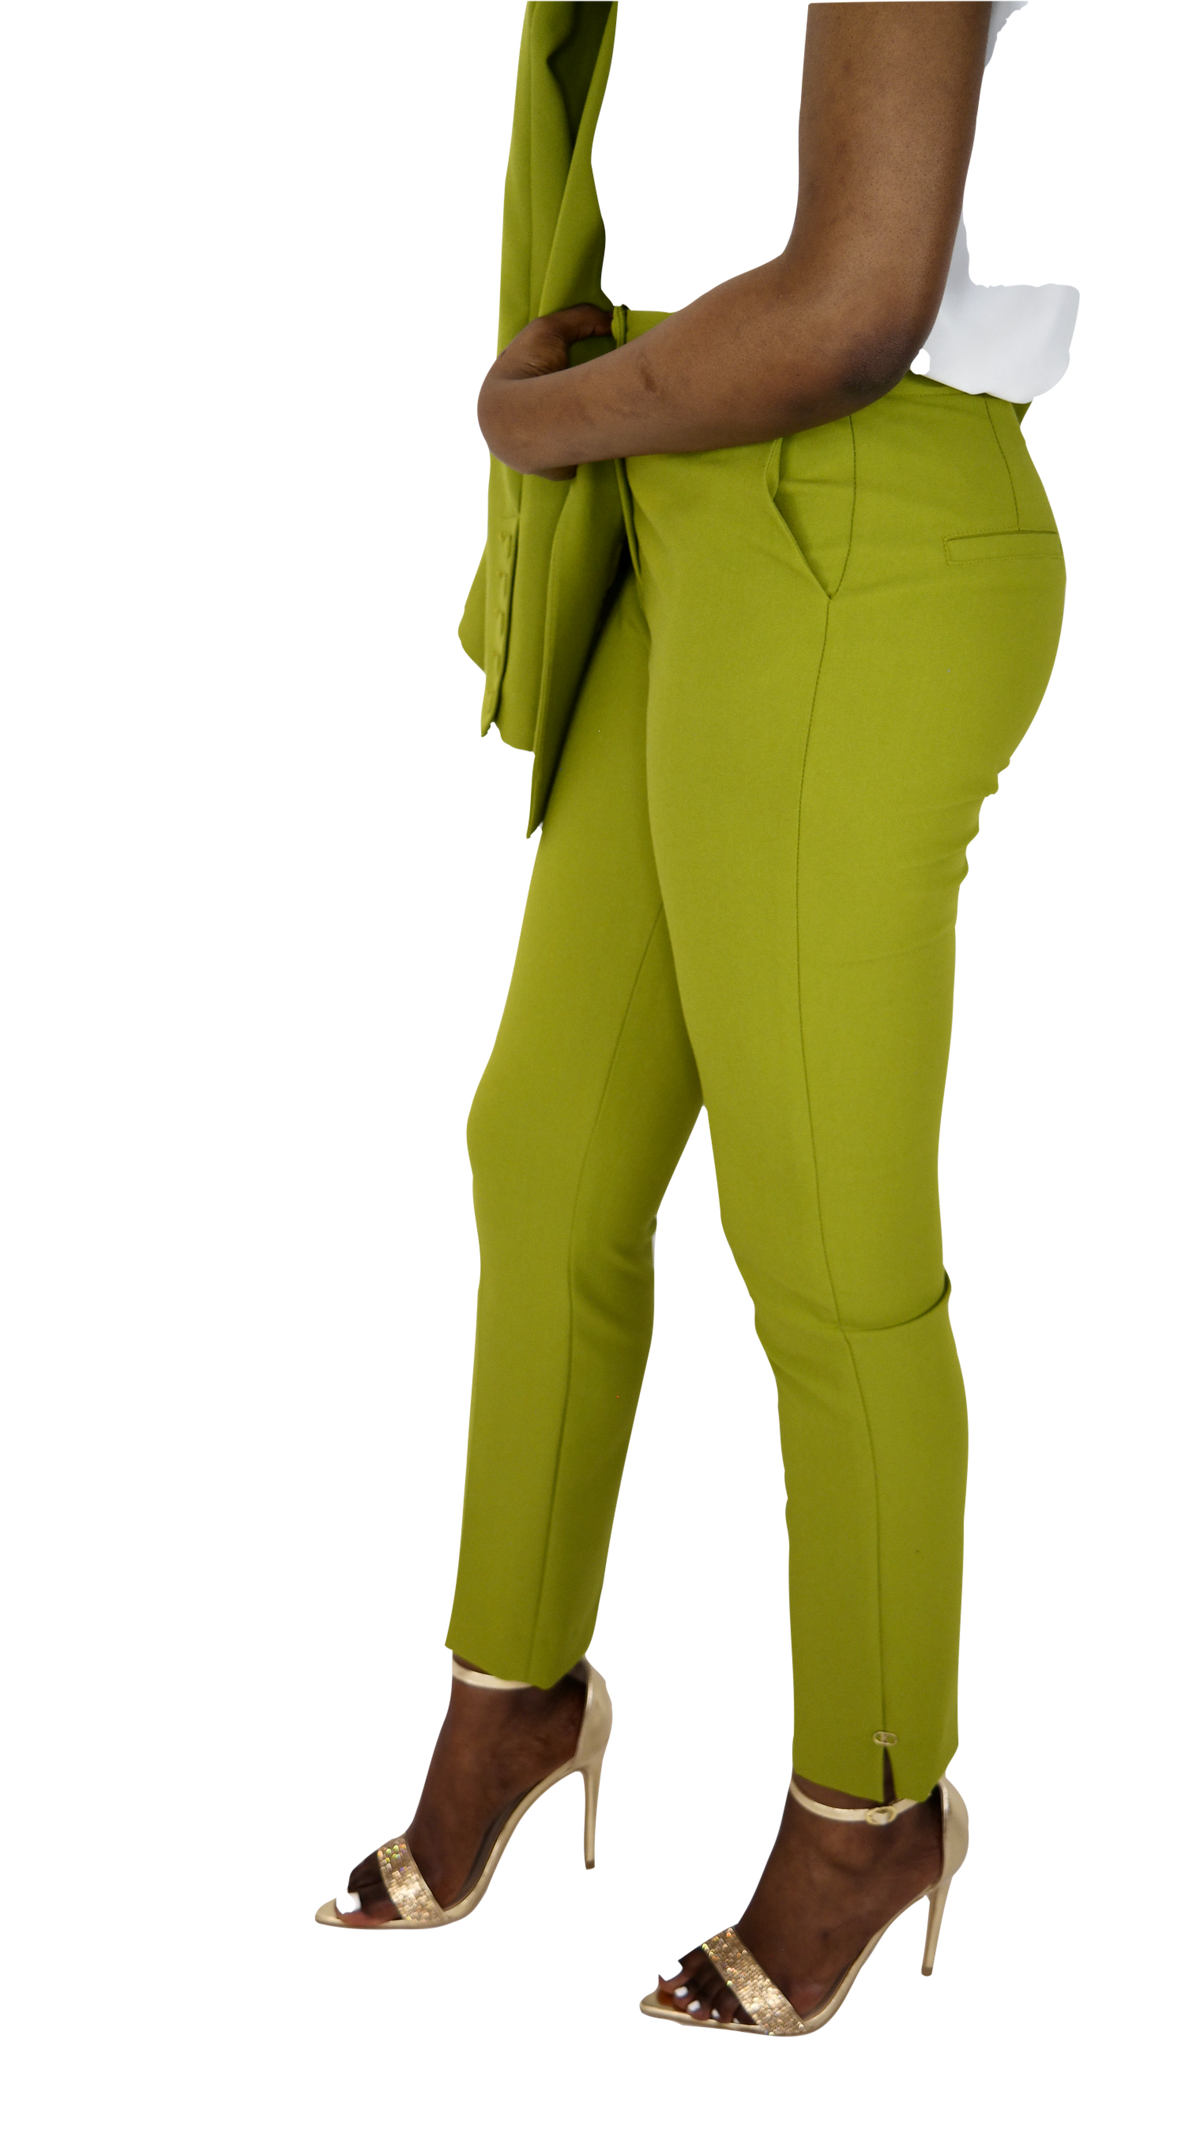 Olive Green Suit